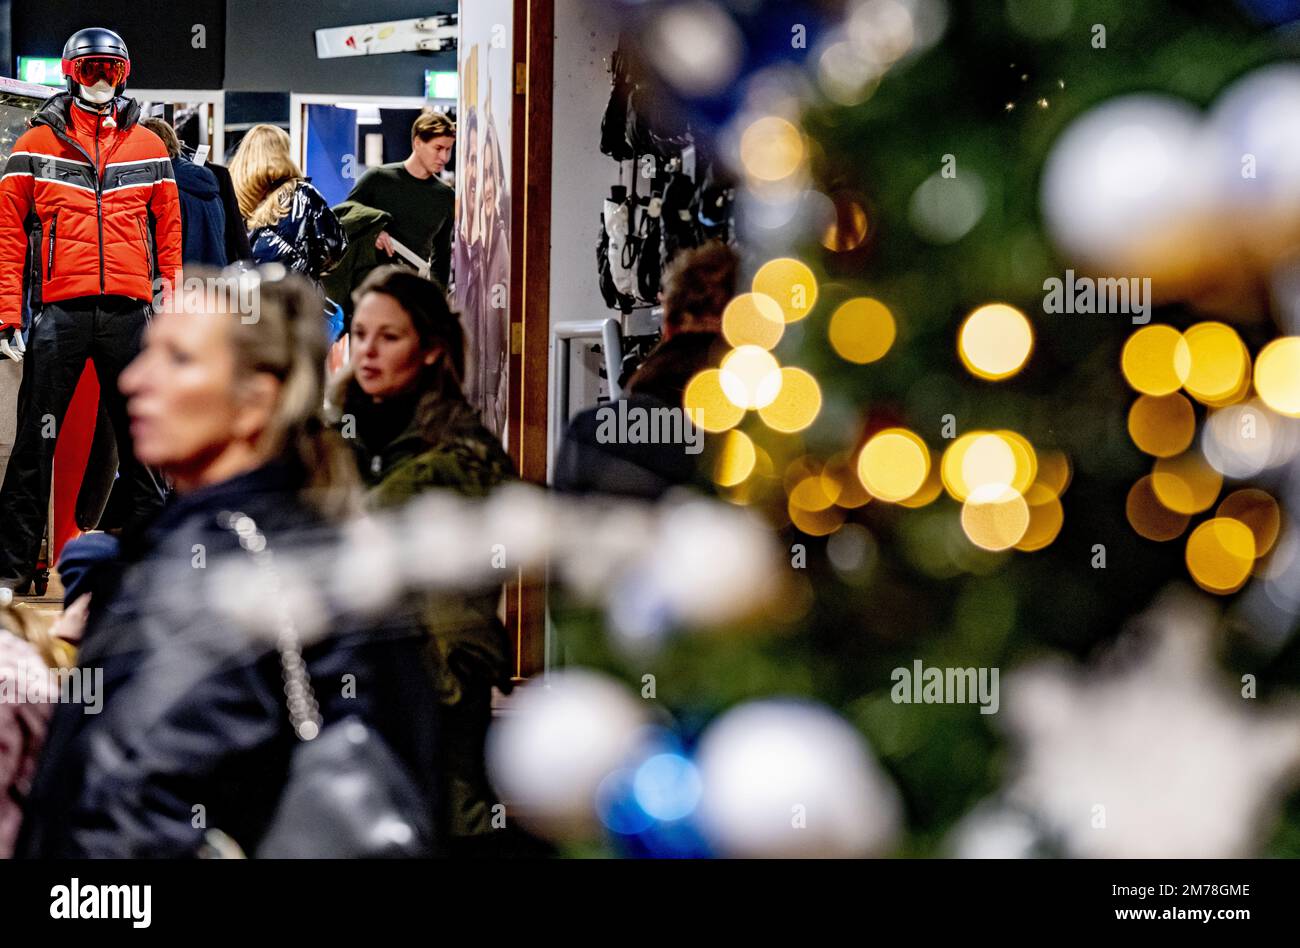 SCHEVENINGEN - Customers looking for winter sports items in the Skihut shop. In the run-up to winter sports, there is a run for winter sports clothing despite the less favorable weather conditions in the ski areas. ANP ROBIN UTRECHT netherlands out - belgium out Stock Photo